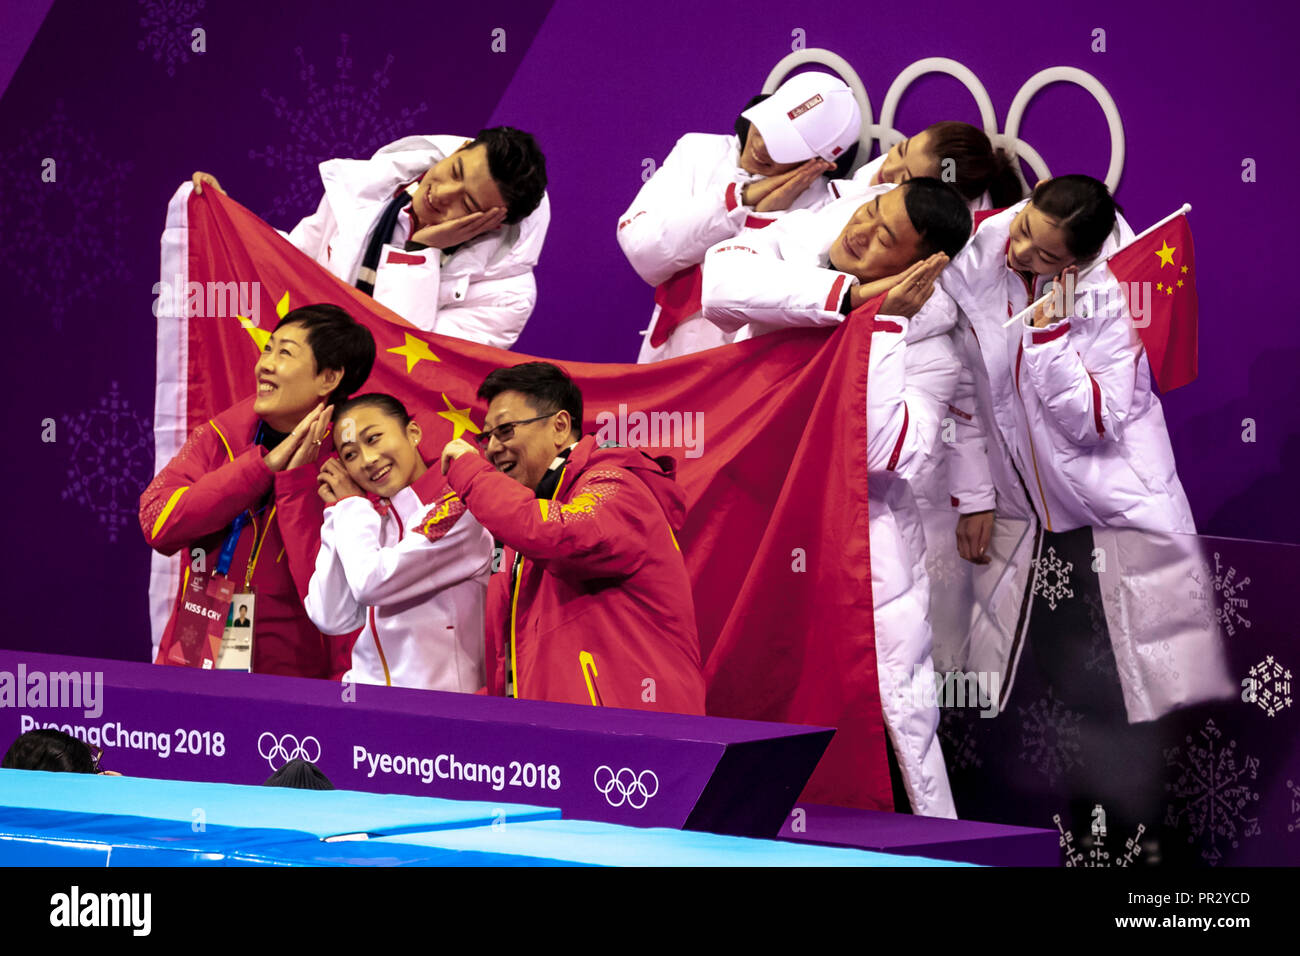 Chinese team celebrating during the Figure Skating Team competition at the Olympic Winter Games PyeongChang 2018 Stock Photo